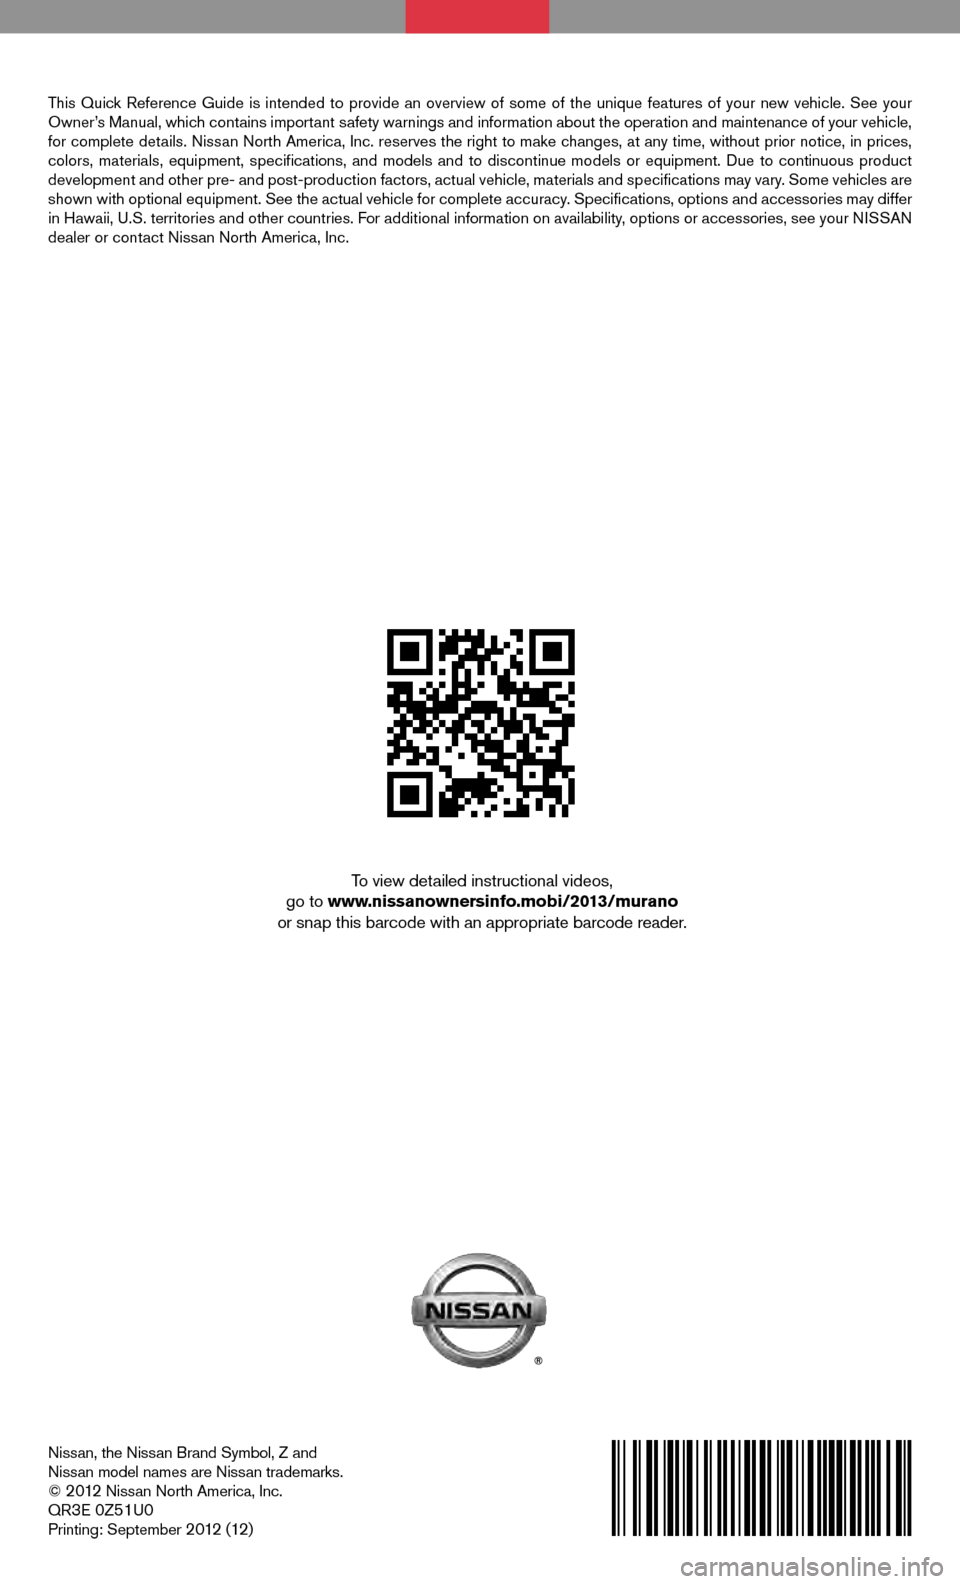 NISSAN MURANO 2013 2.G Quick Reference Guide Nissan, the Nissan Brand Symbol, Z and 
Nissan model names are Nissan trademarks.
© 
2012 Nissan North America, Inc.
QR3E 0Z51U0Printing: September 2012 (12)
QUICK  REFERENCE  GUIDE
2013
 MURANO
To v